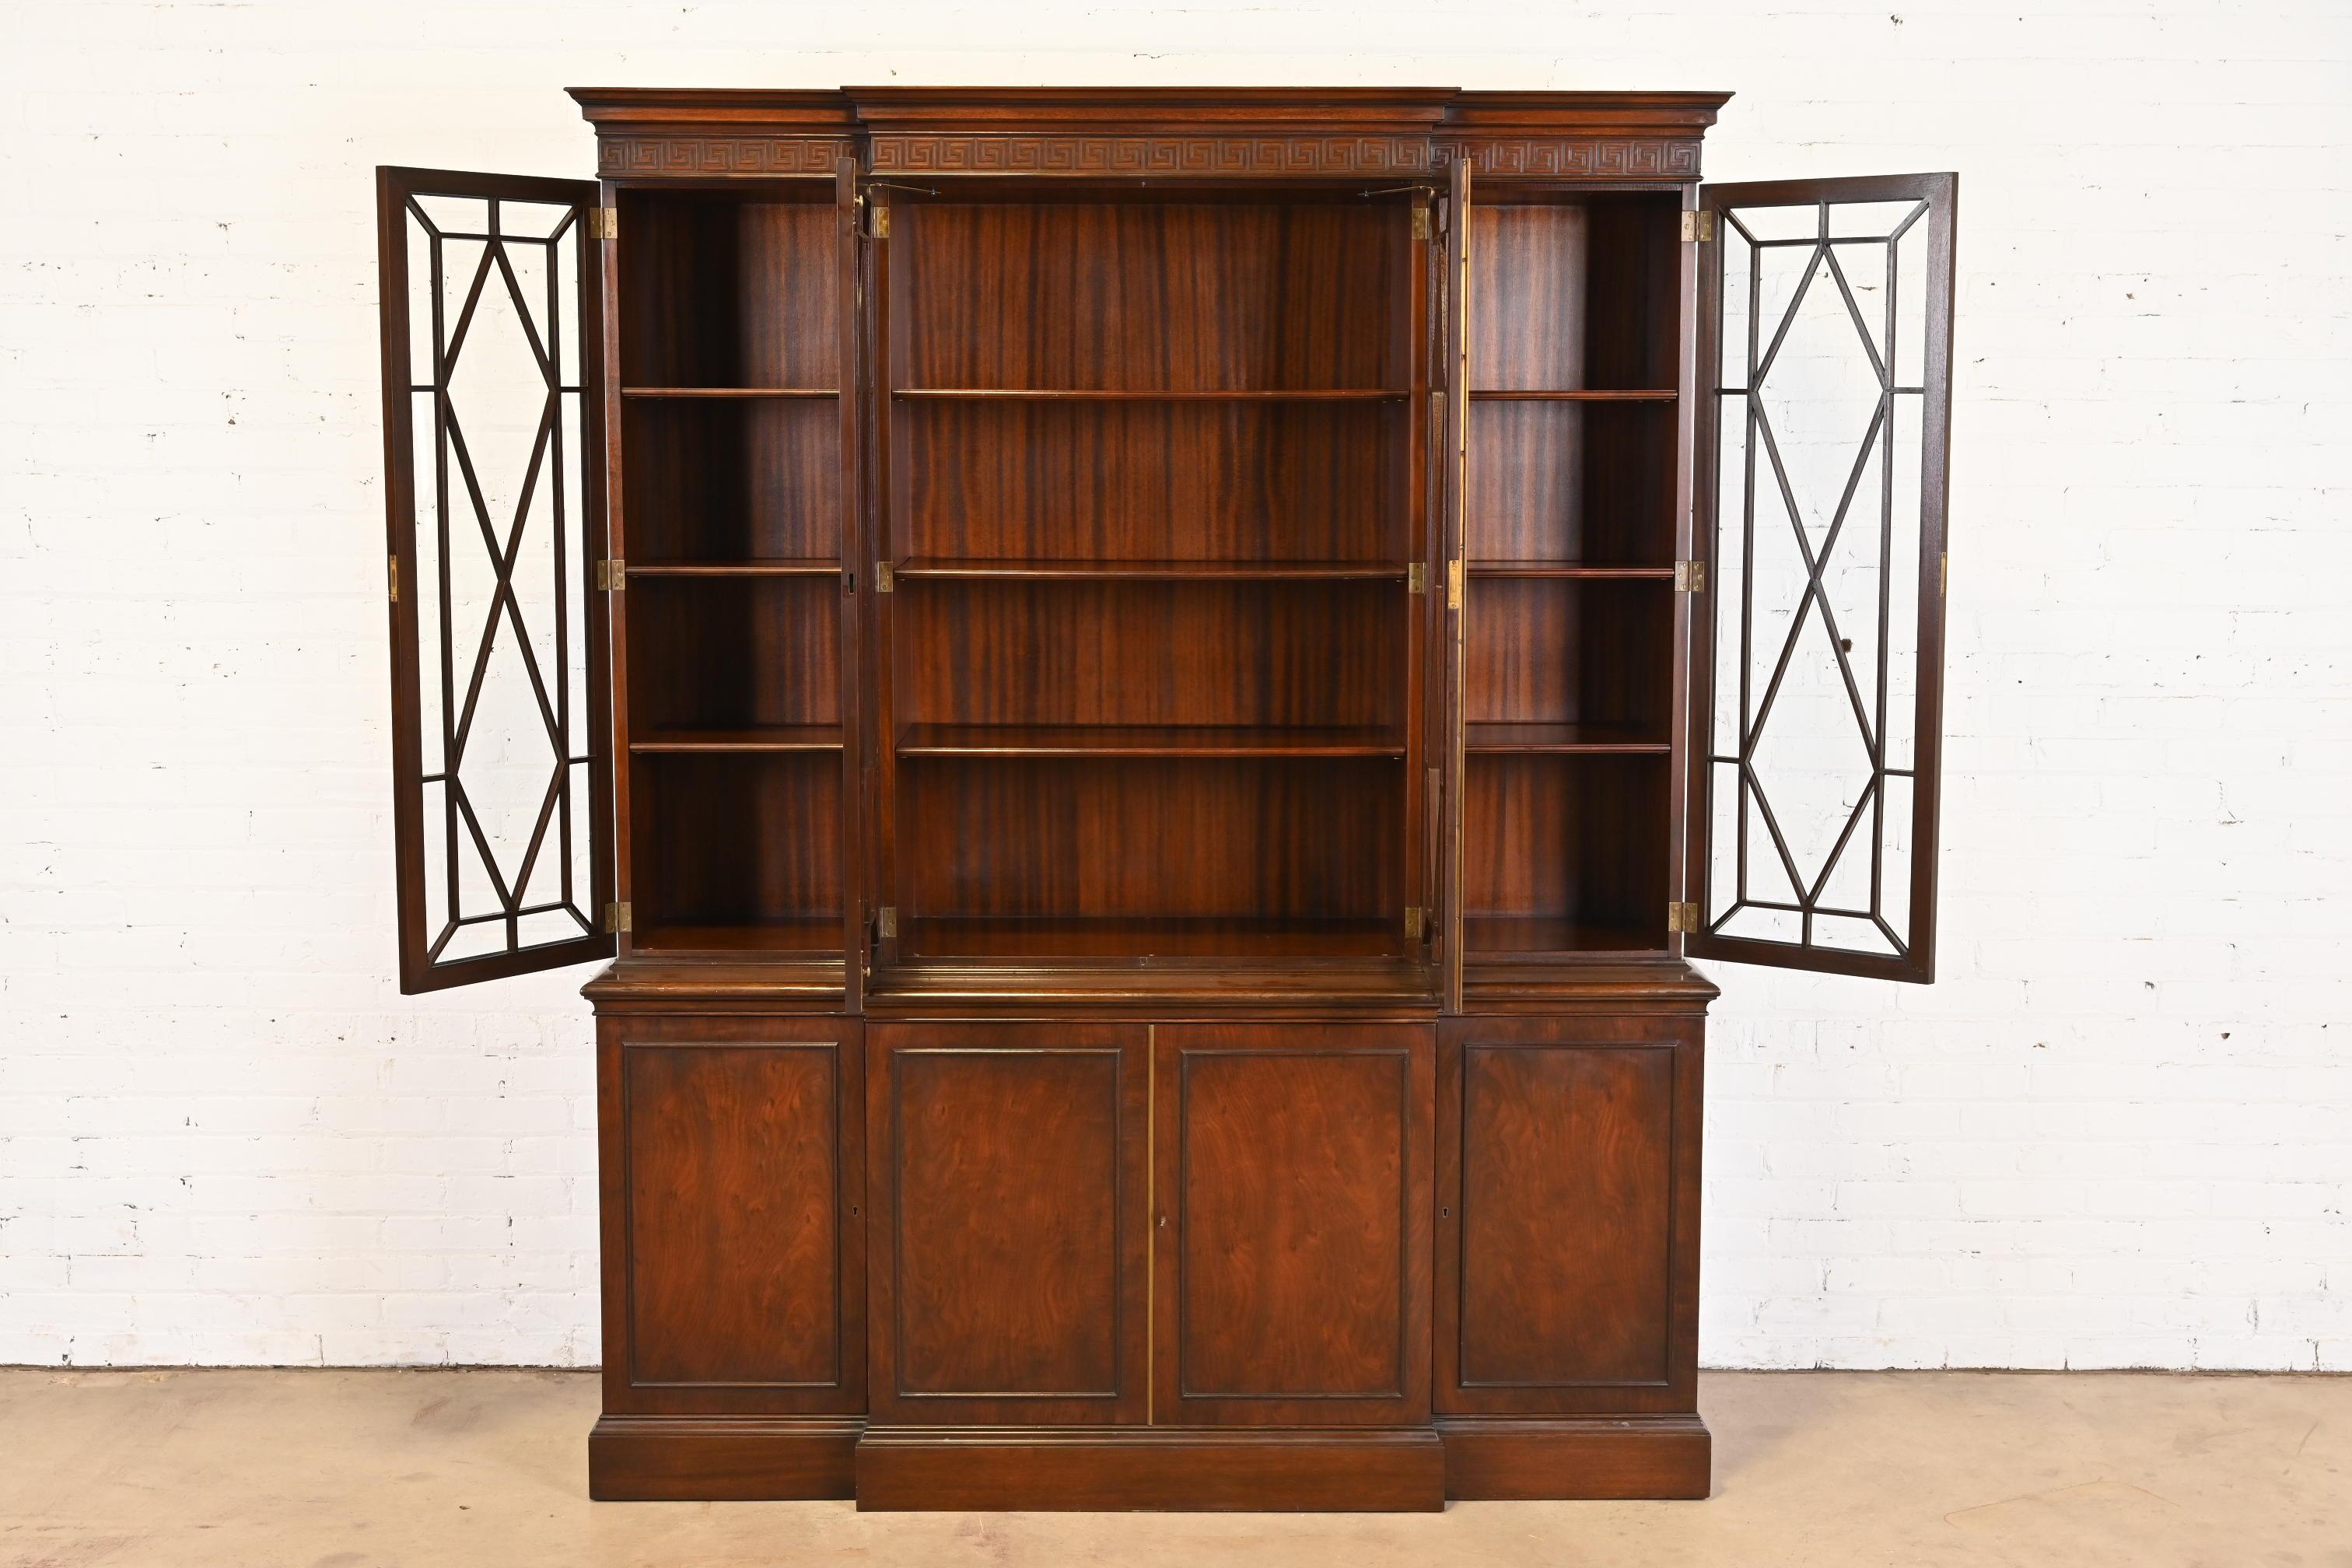 Mid-20th Century Schmieg & Kotzian Georgian Carved Mahogany Breakfront Bookcase Cabinet, 1940s For Sale